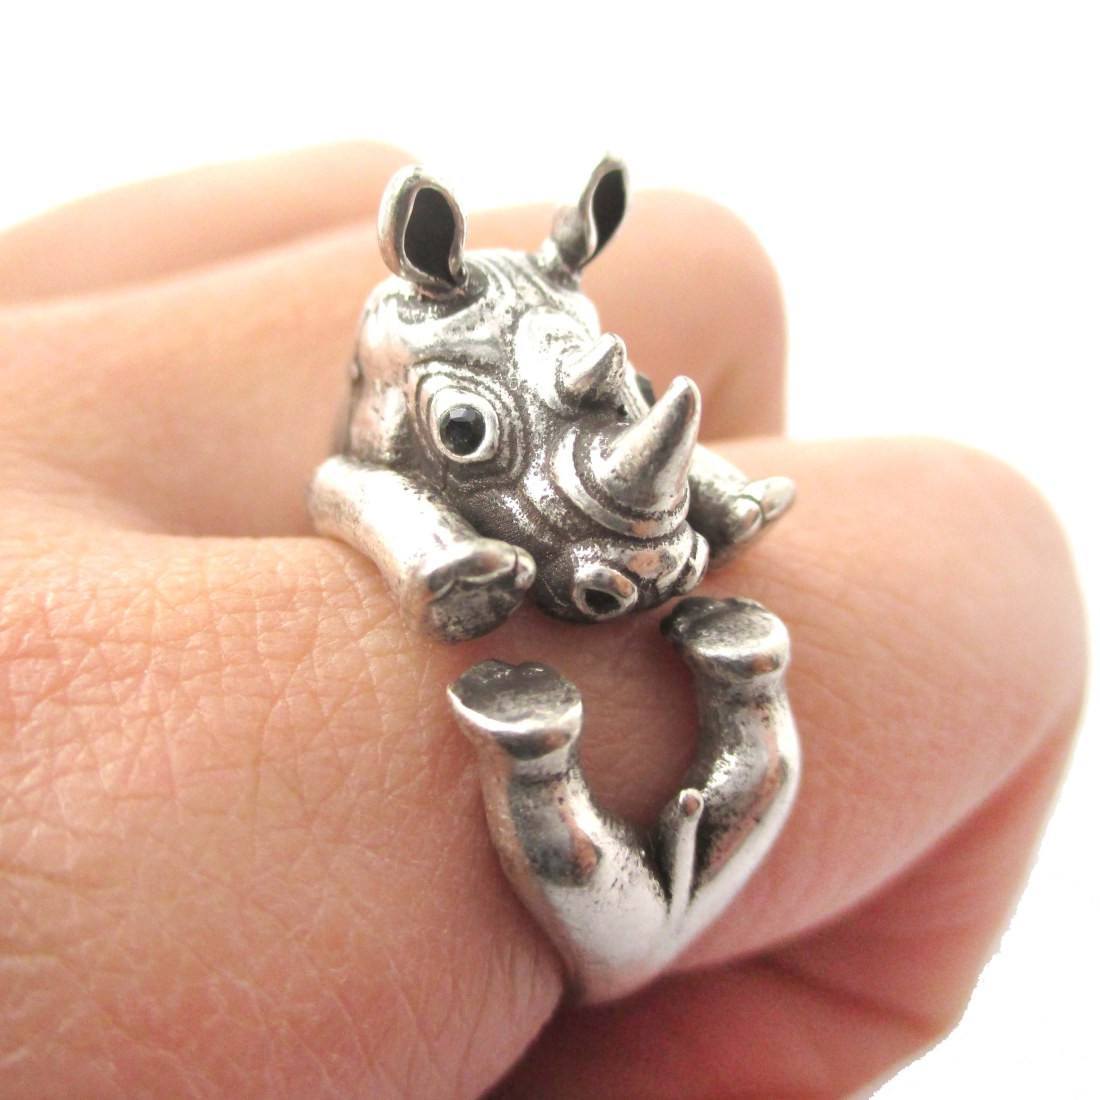 Realistic Rhinoceros Rhino Shaped Animal Wrap Ring in Silver | US Size 6 to 9